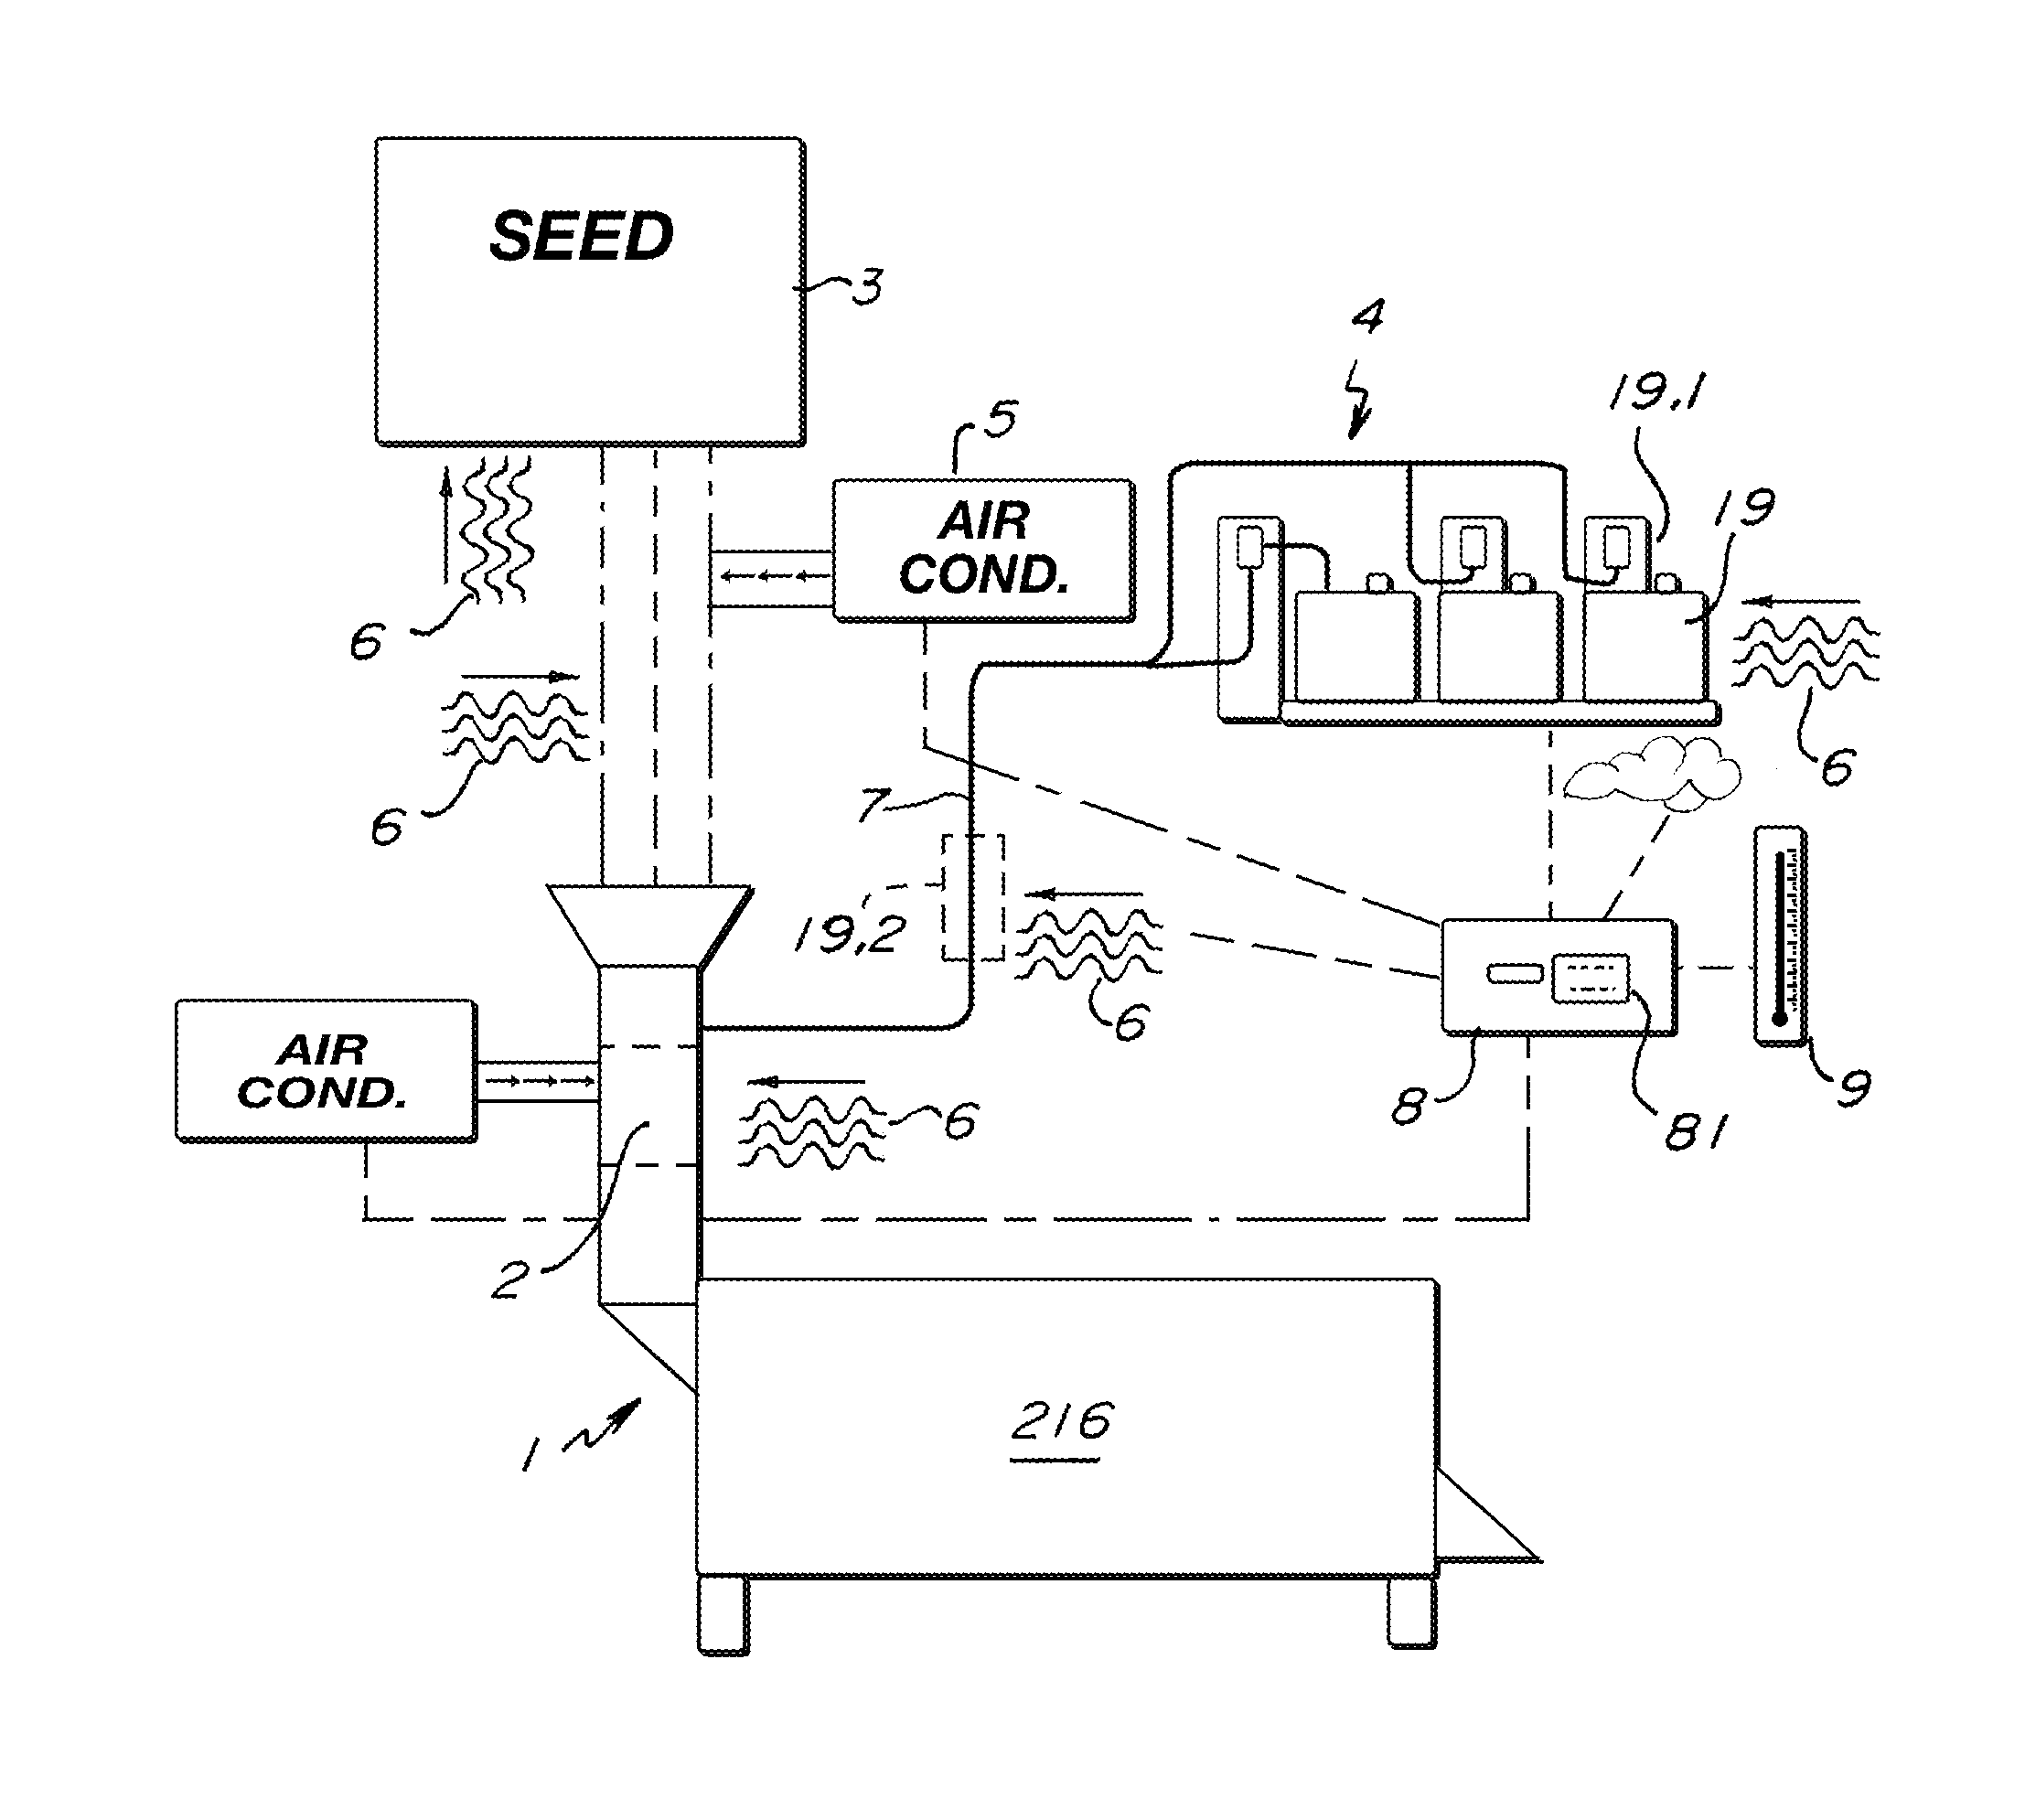 Seed treatment device with improved fluid application